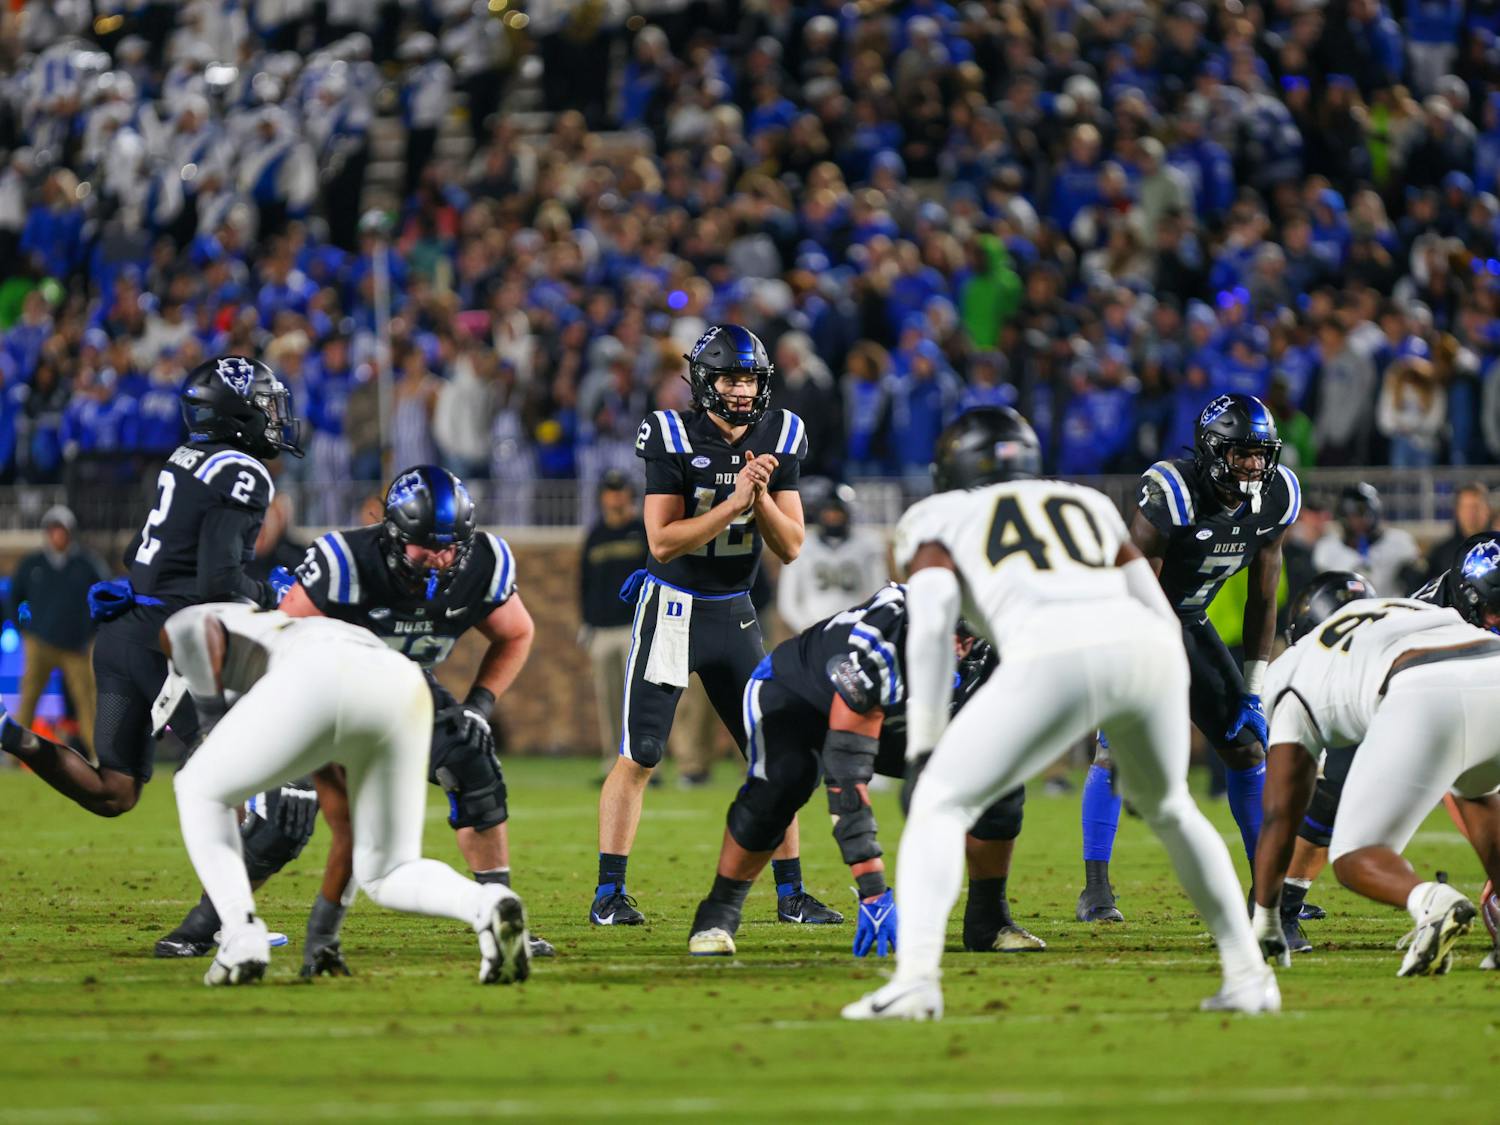 Quarterback Grayson Loftis prepares for a snap in Duke football's victory against Wake Forest.